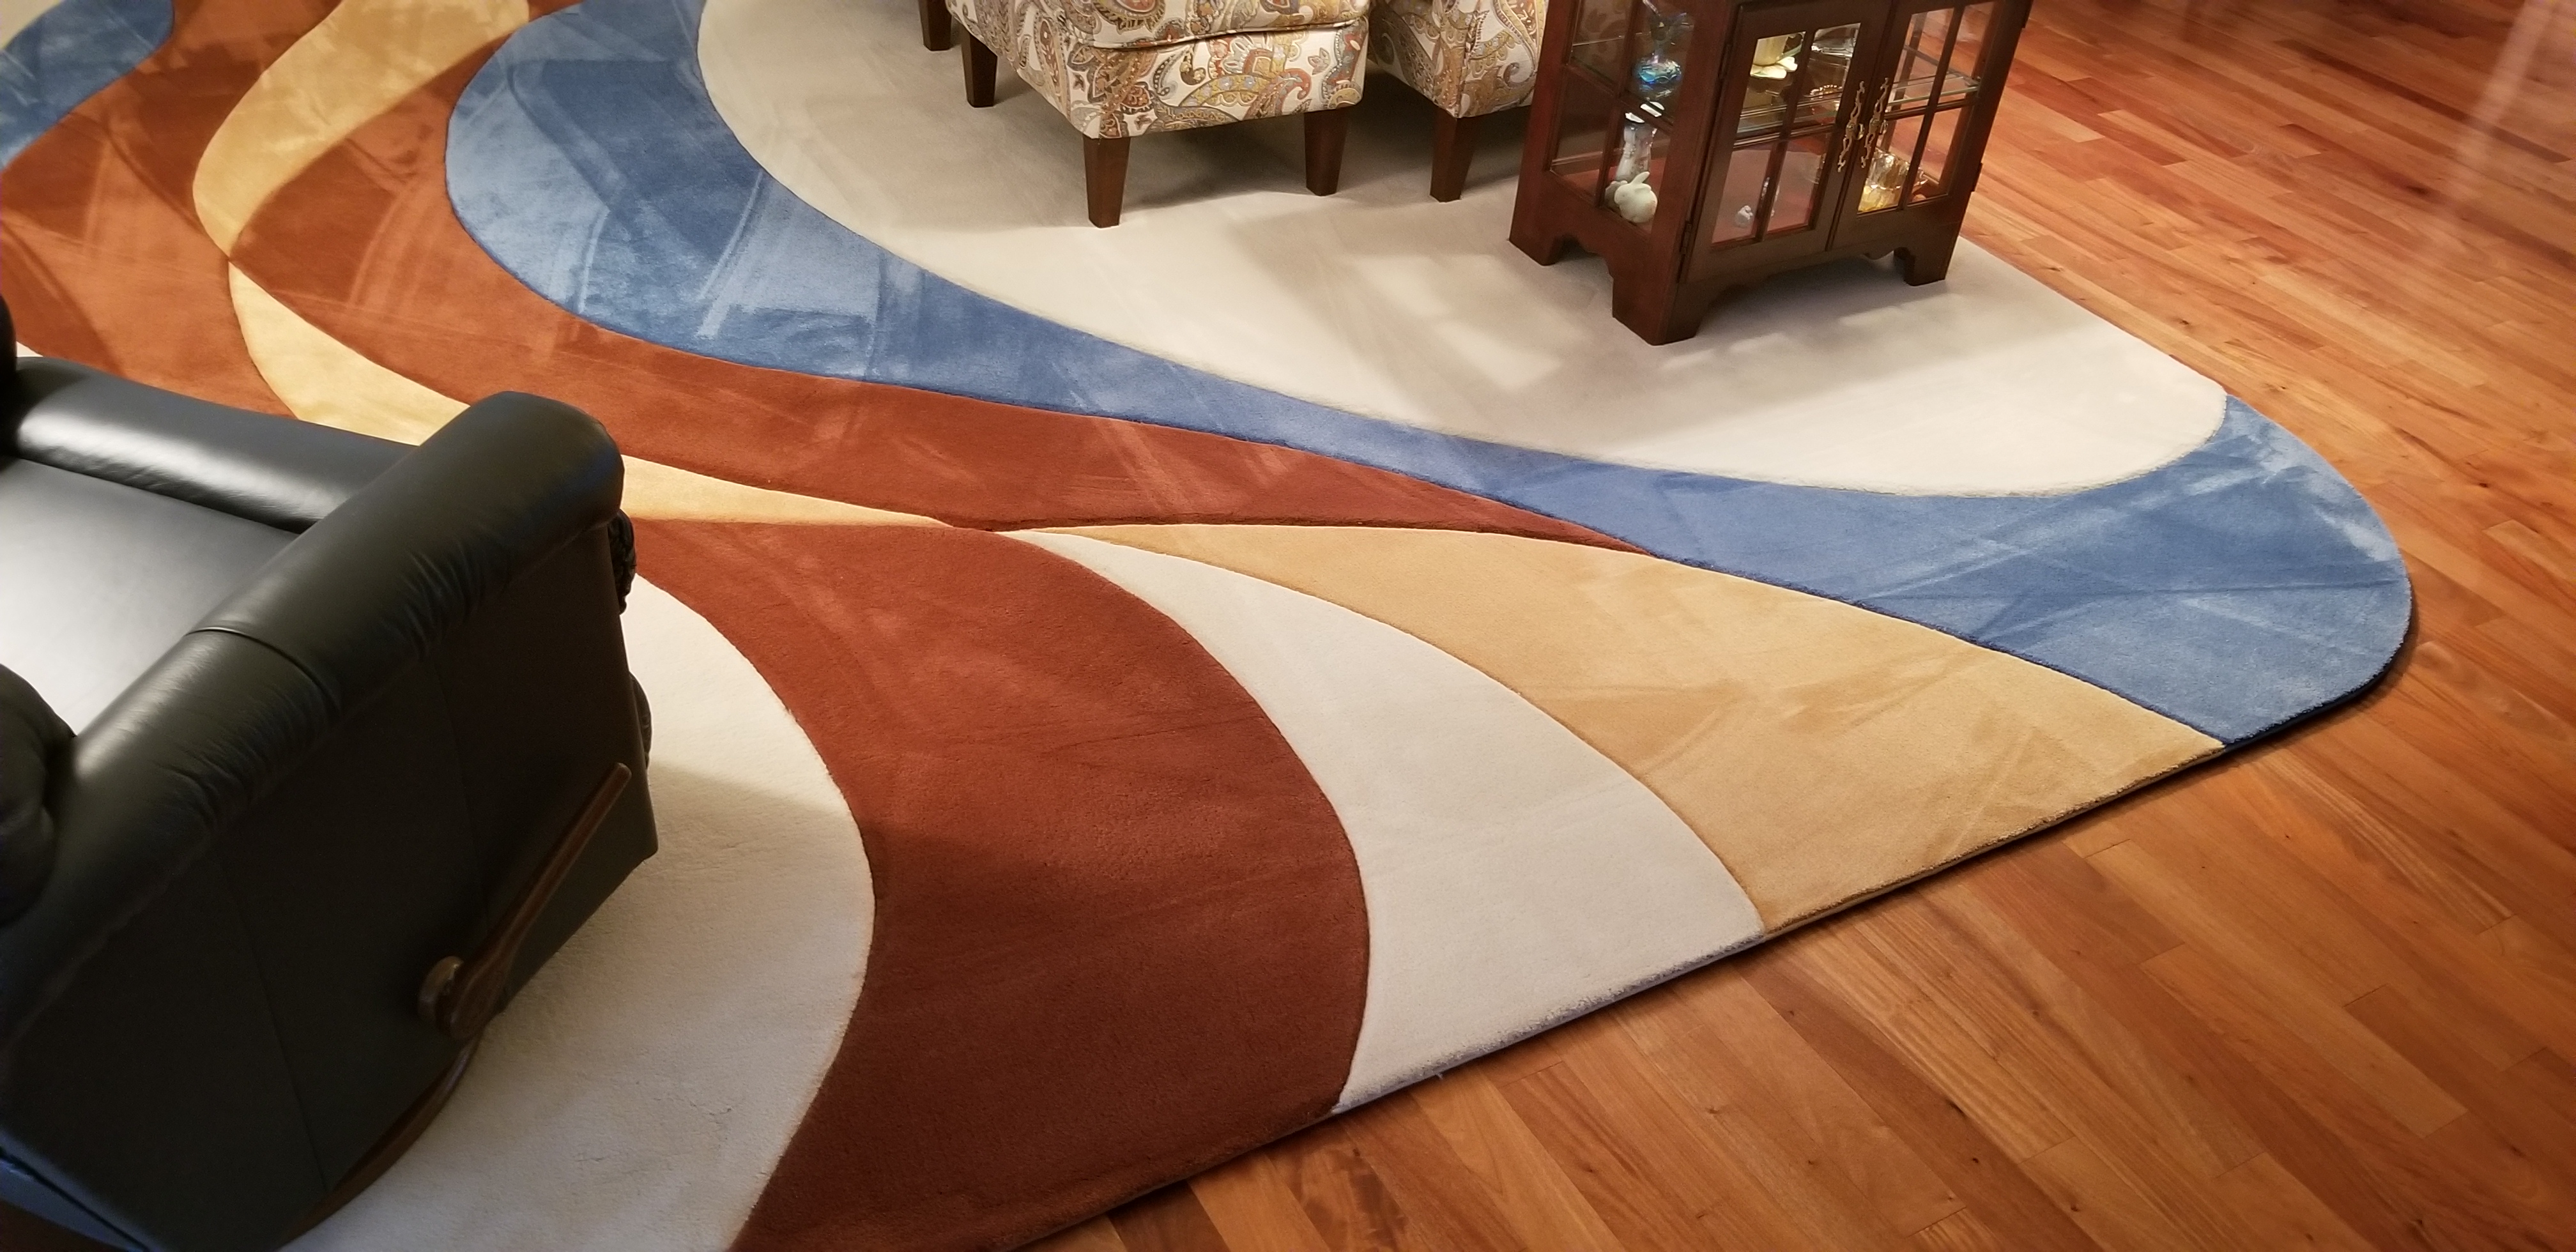 A rug with an abstract design on it